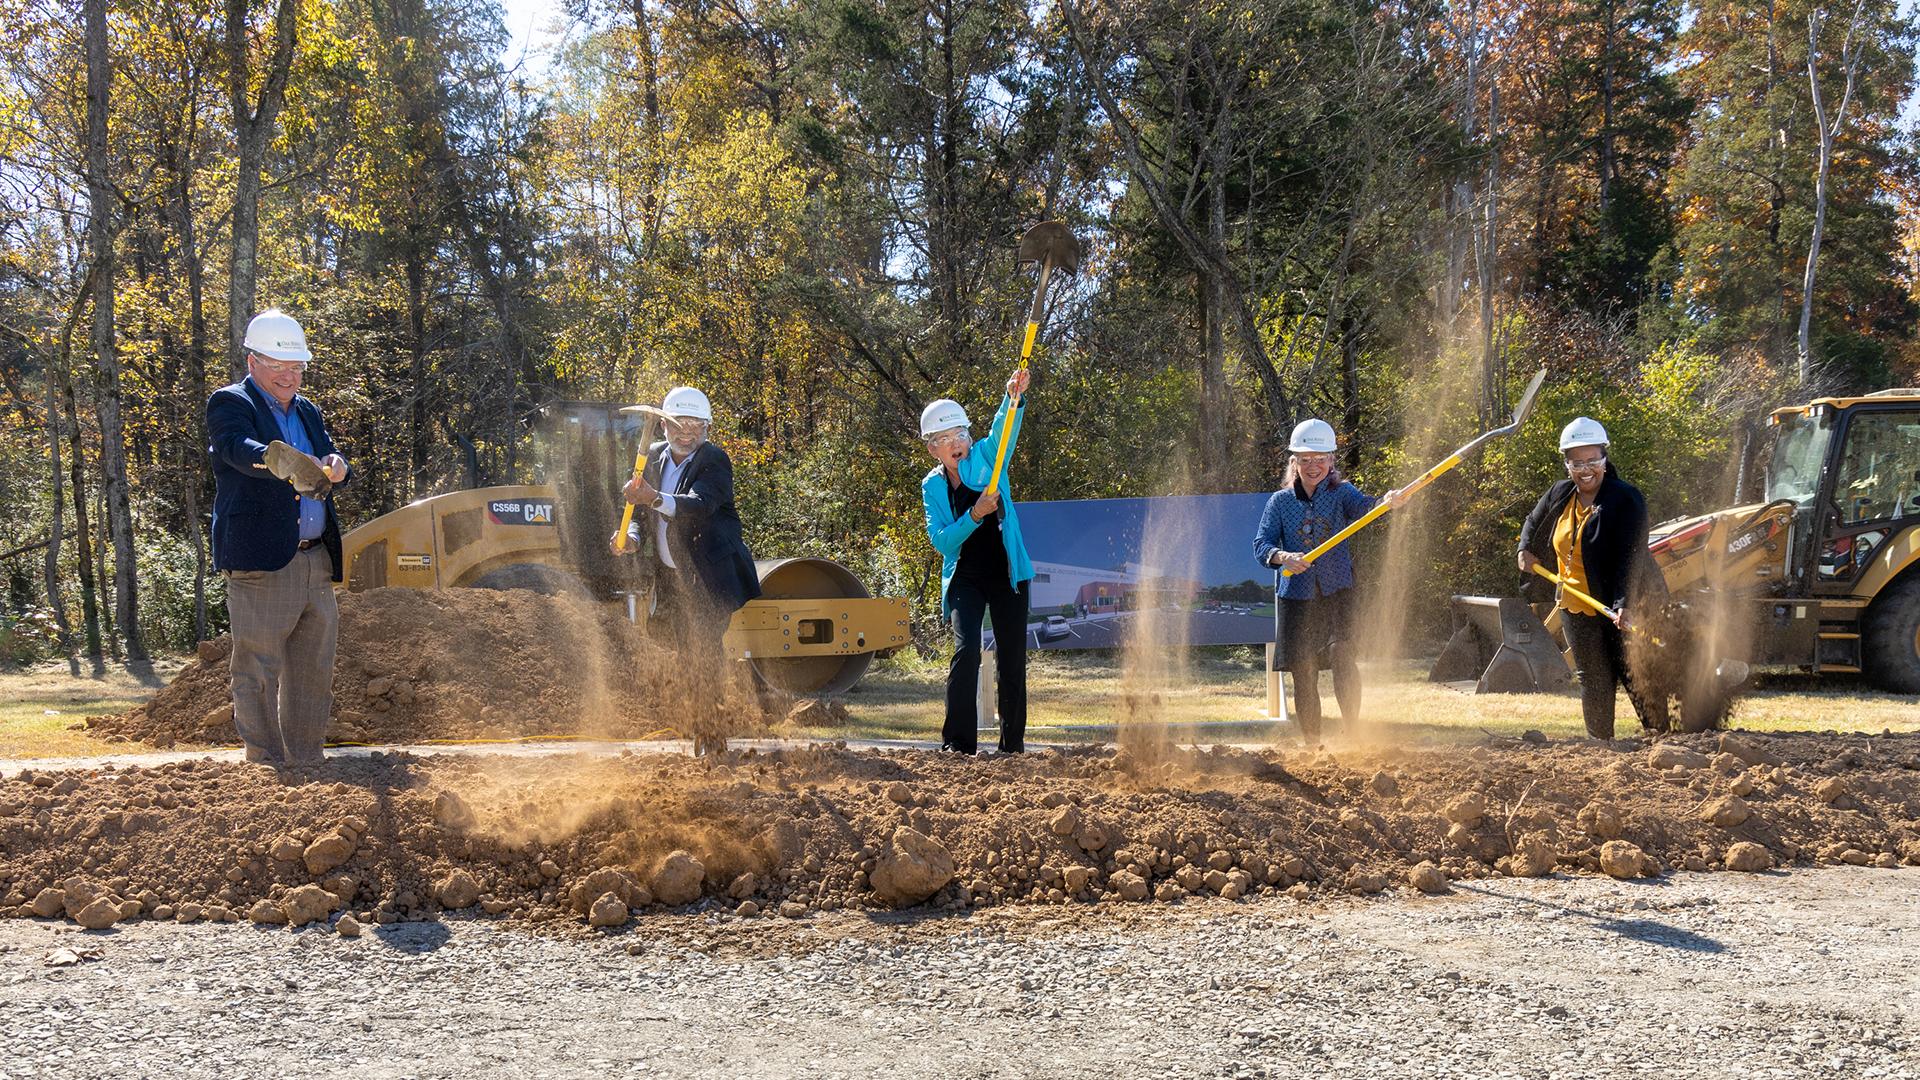 Dust flies to start construction of the SIPRC, with (l-r) ORNL Site Manager Johnny Moore, ORNL Director Thomas Zacharia, Secretary of Energy Jennifer Granholm, DOE Under Secretary for Science and Innovation Geraldine Richmond and Office of Science Director Asmeret Asefaw Berhe. Photo: Genevieve Martin